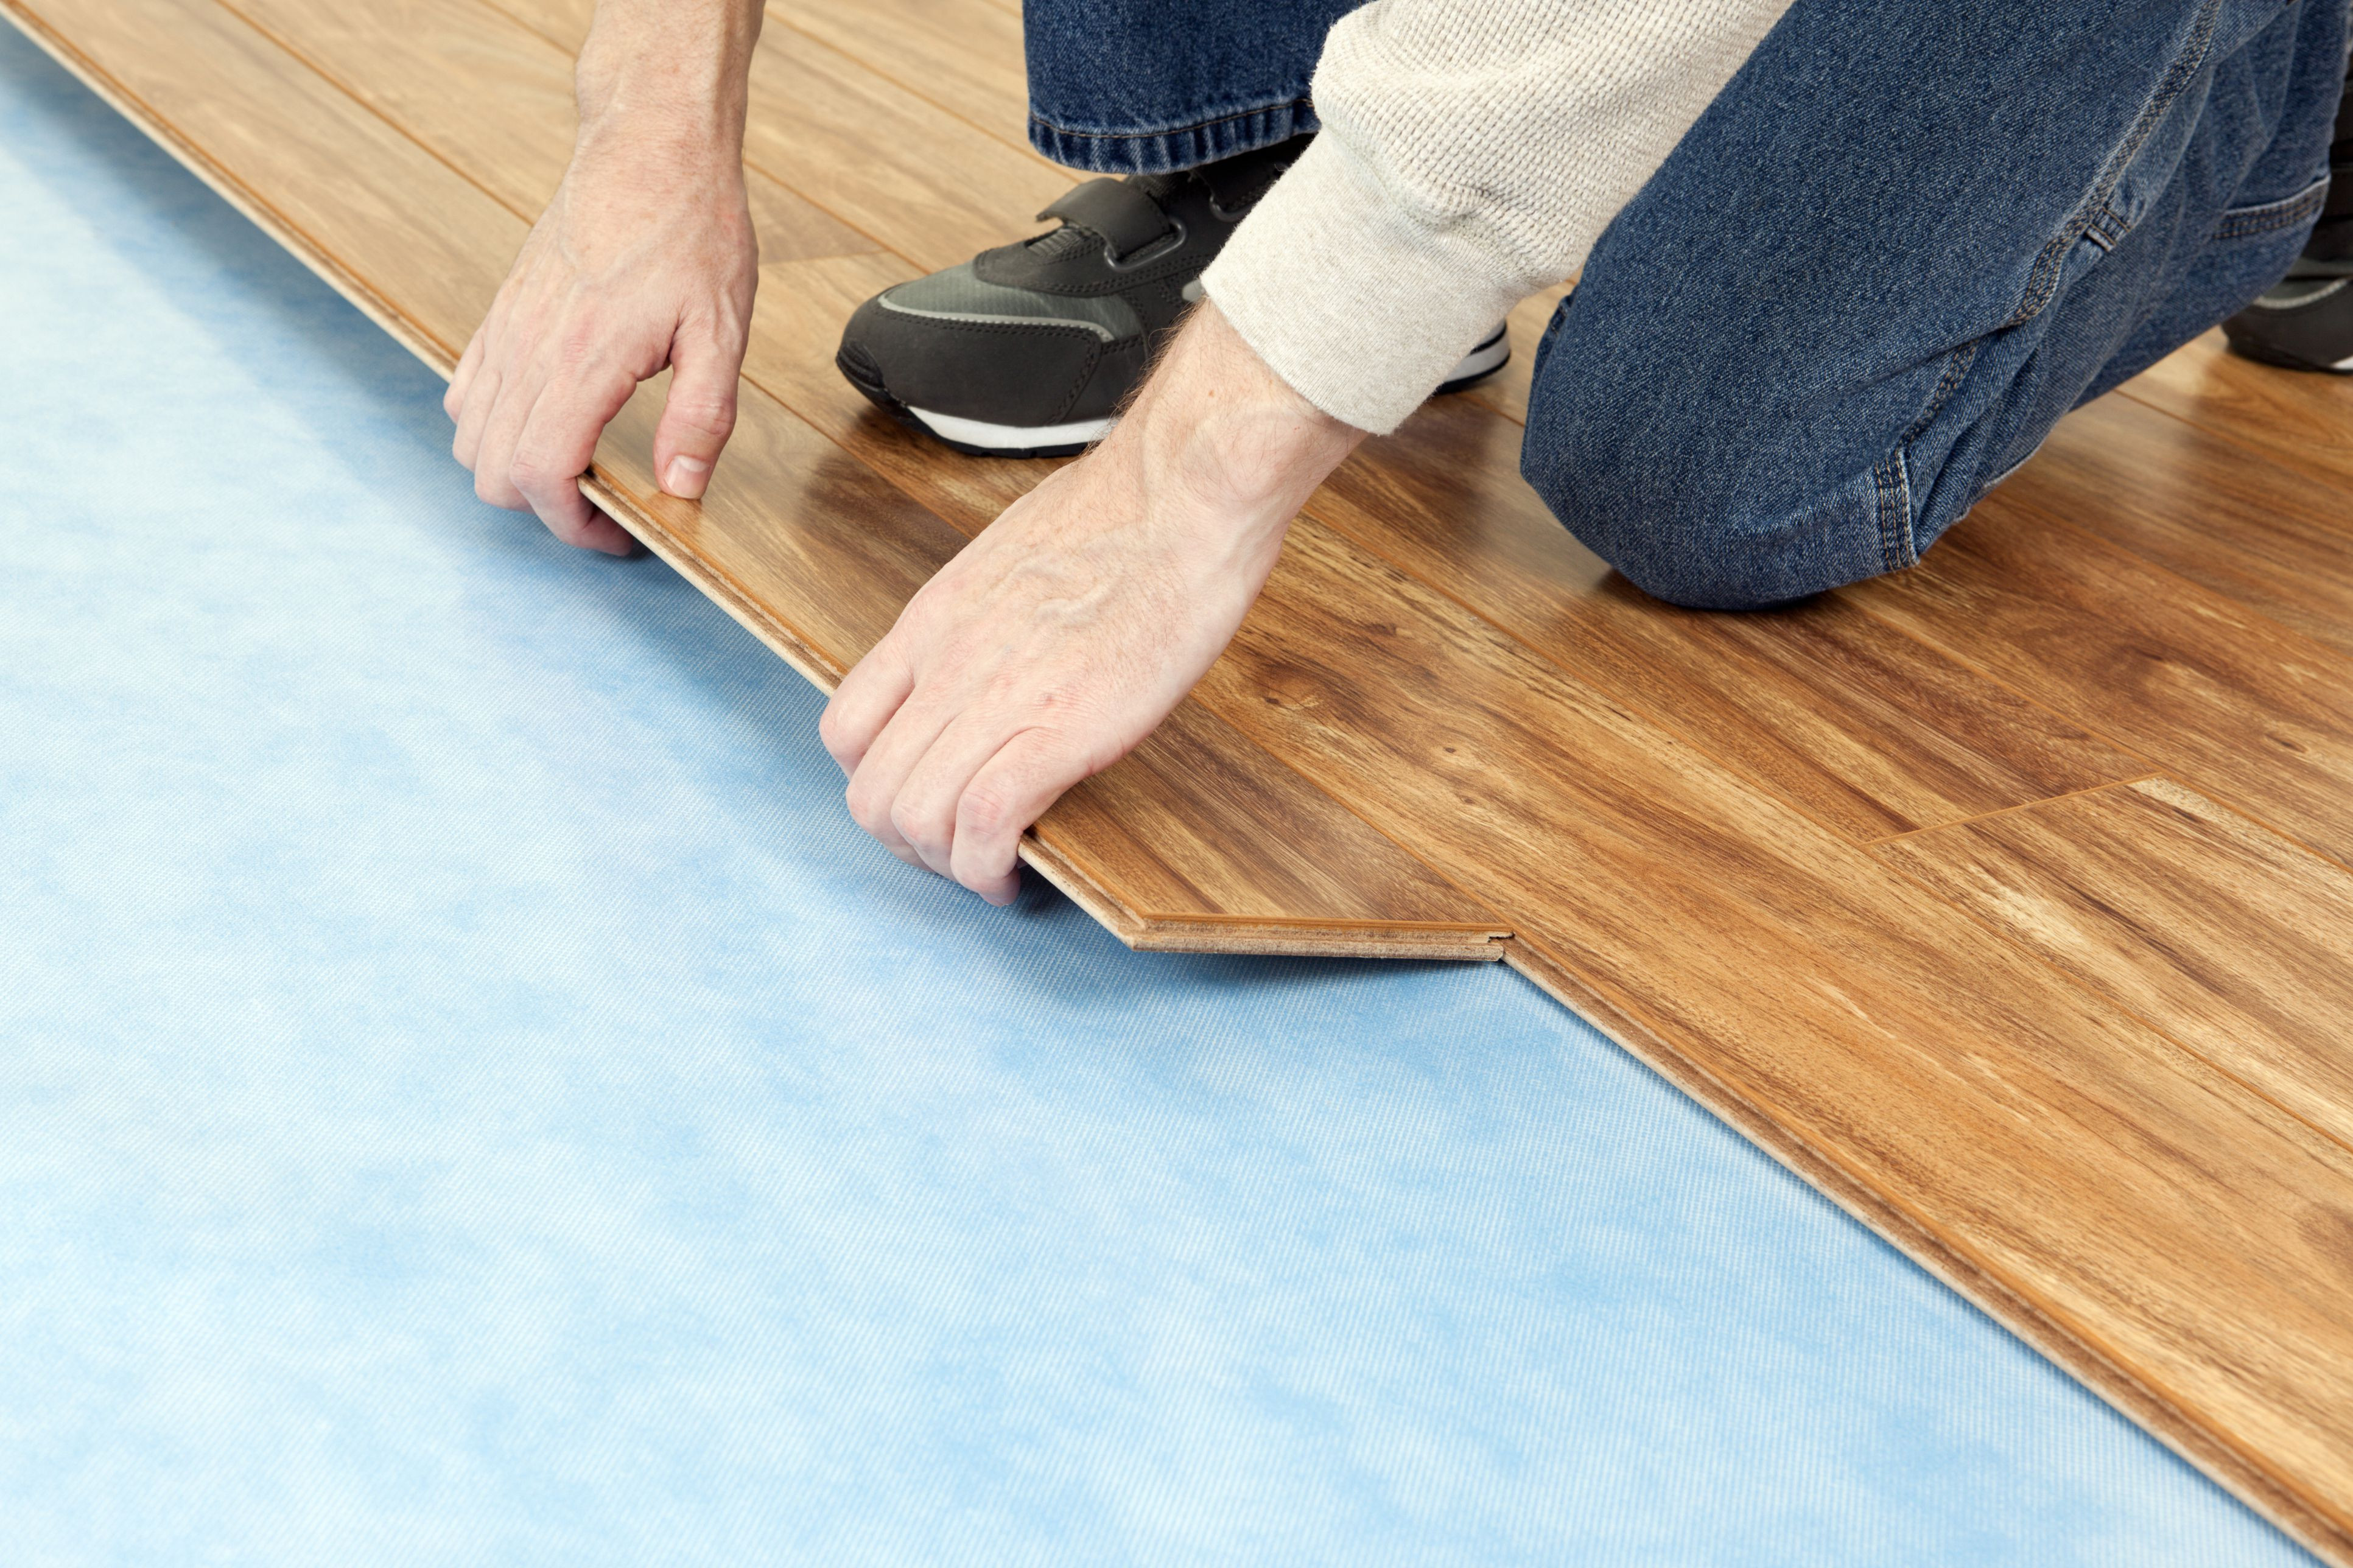 how to install engineered hardwood floors yourself of flooring underlayment the basics within new floor installation 185270632 582b722c3df78c6f6af0a8ab